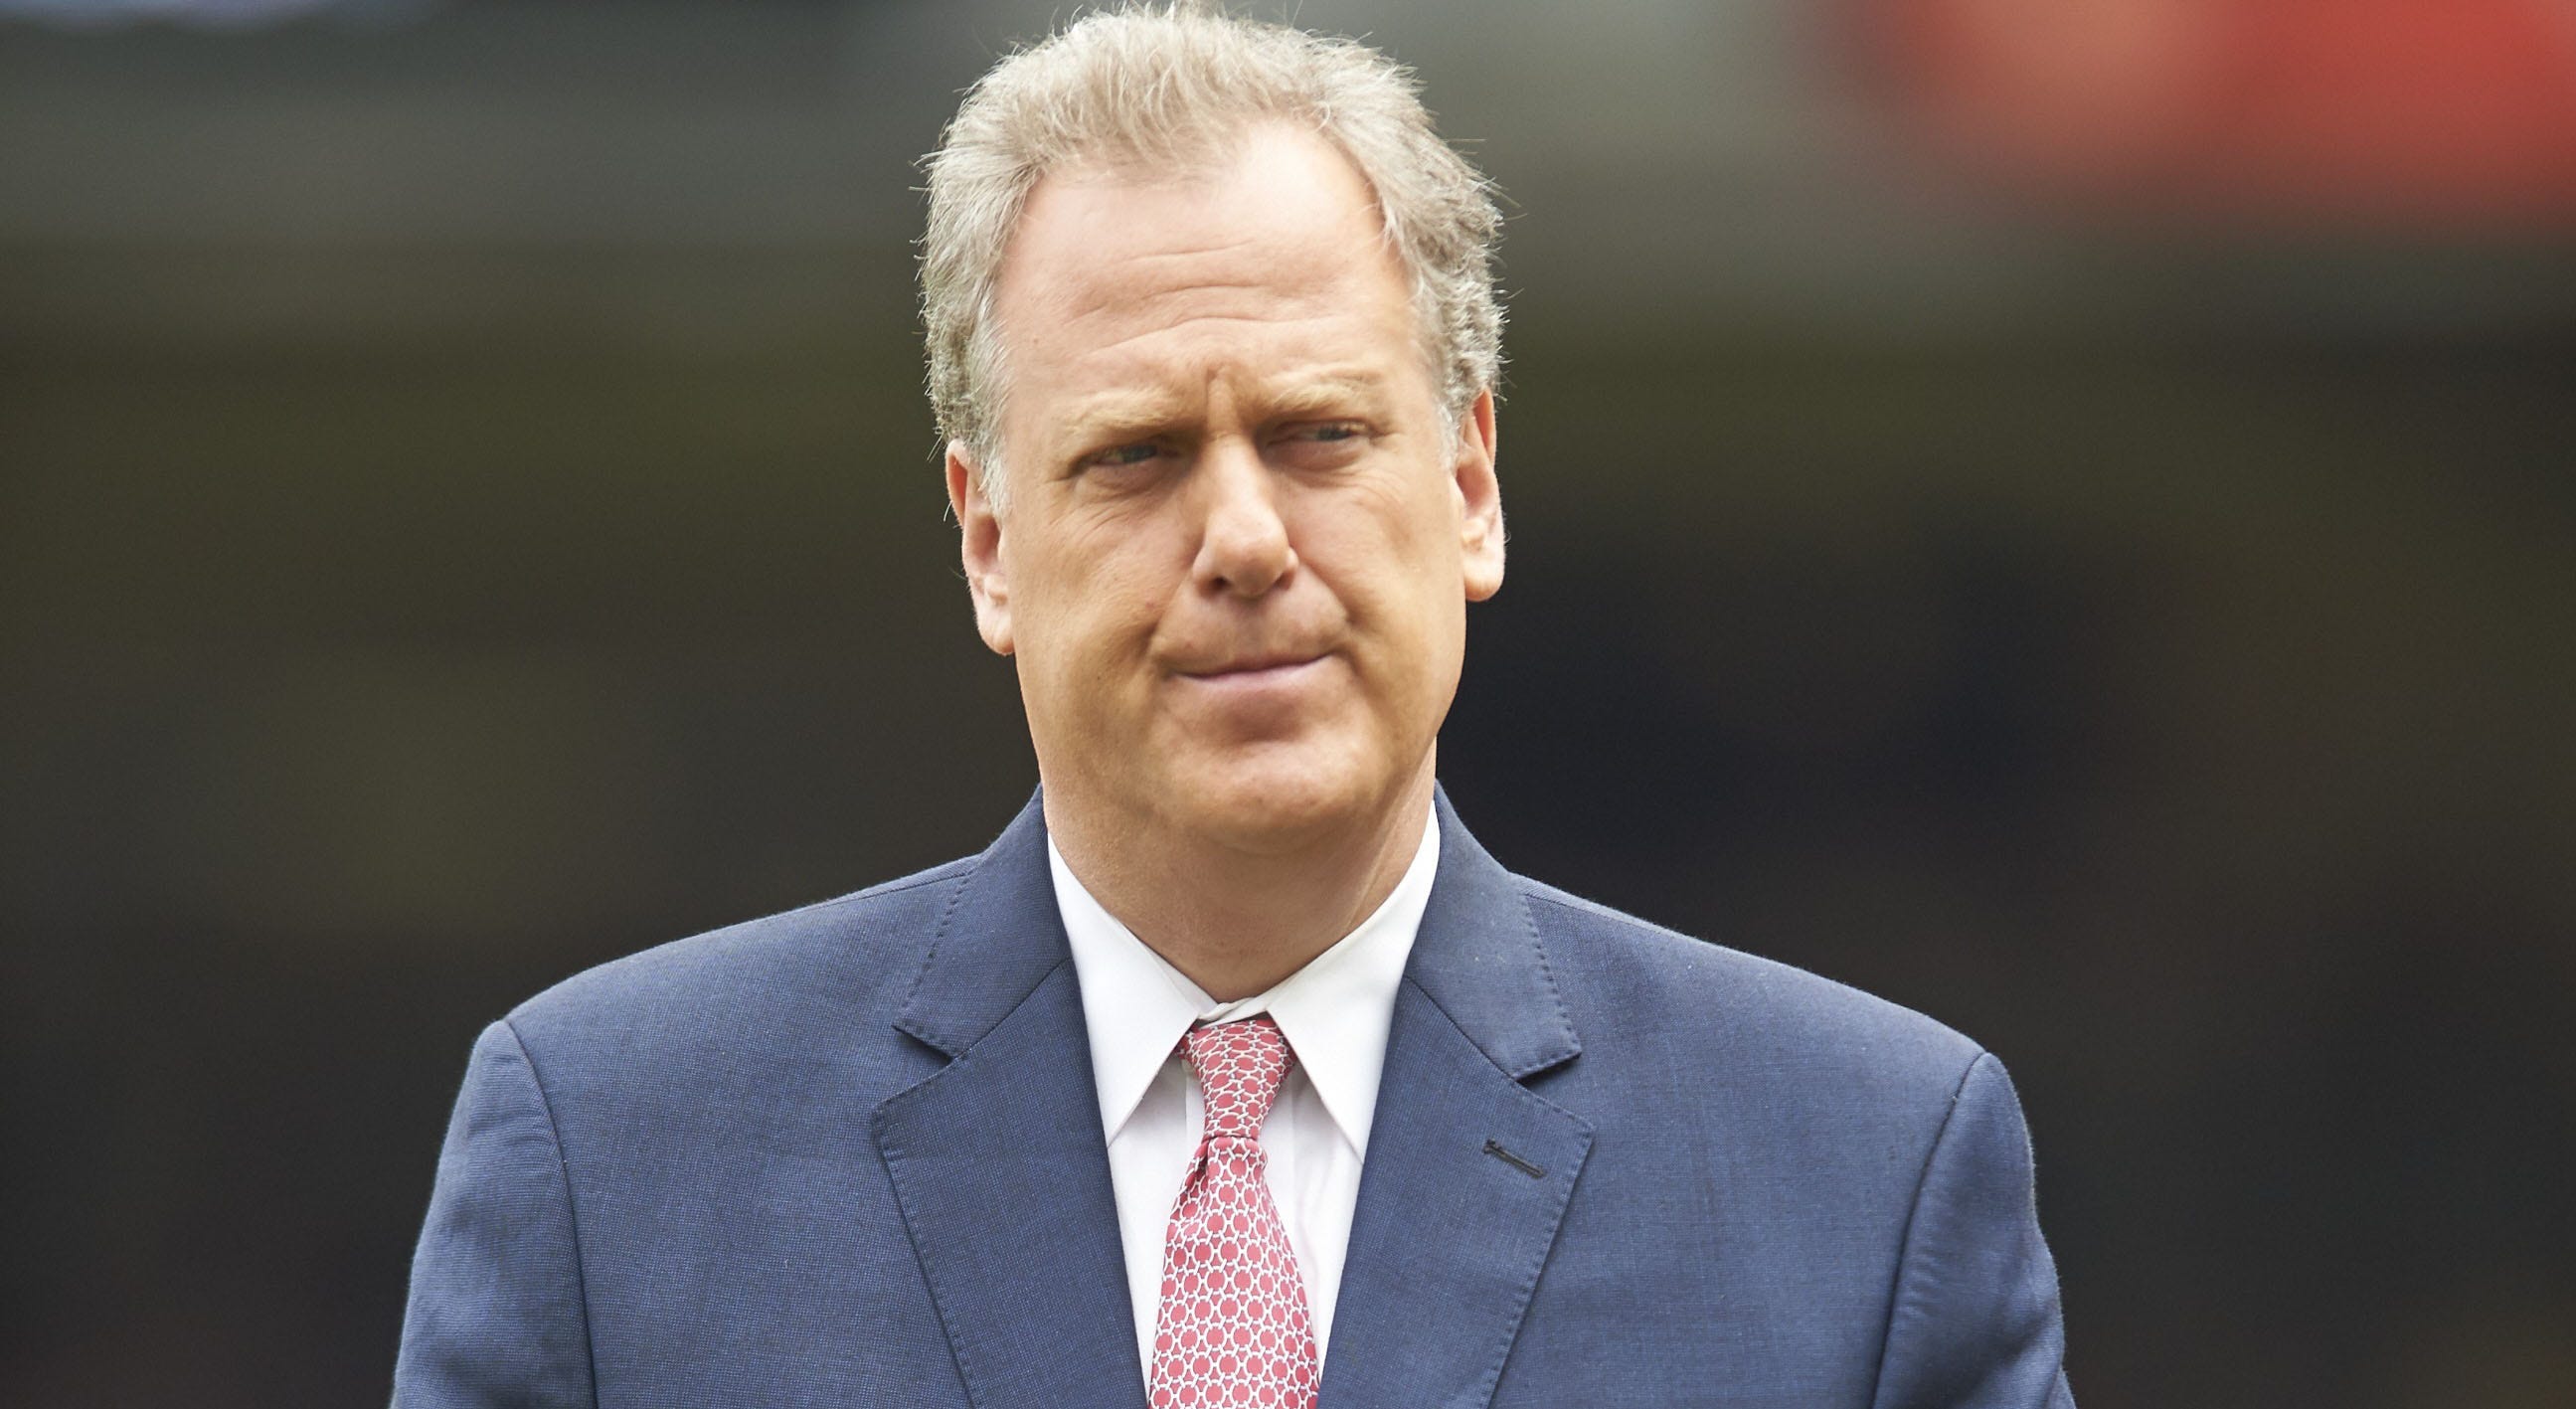 Curt Schilling sounds off on Michael Kay’s call of Aaron Judge’s 61st home run: ‘Let the moment breathe’ – Fox News